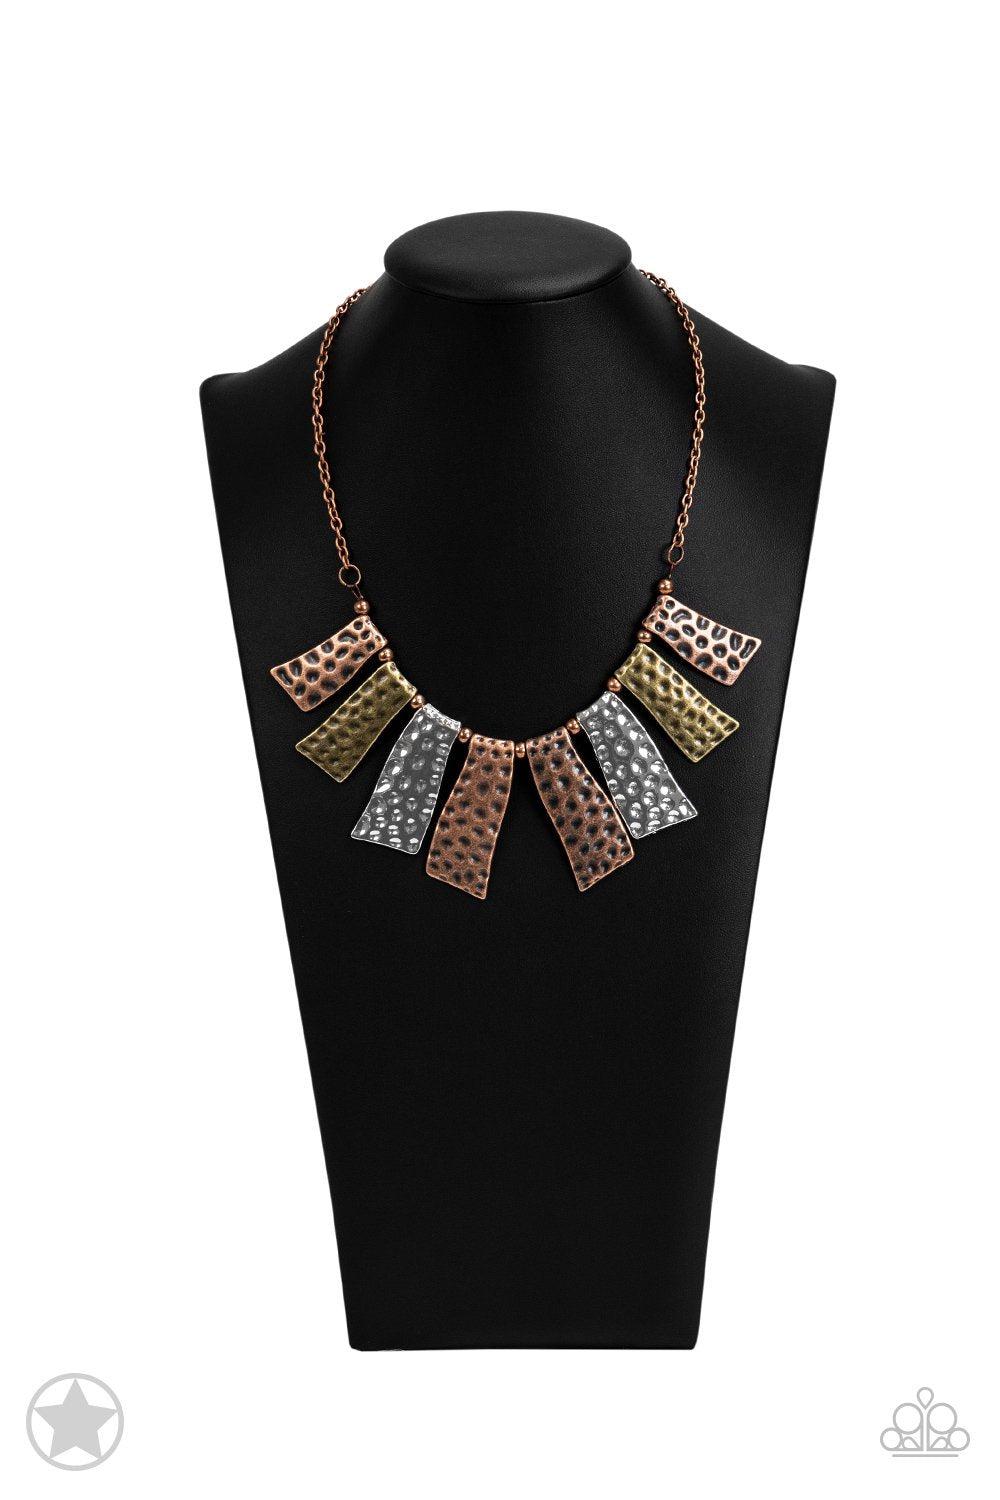 A Fan of the Tribe Copper, Silver and Brass Necklace and matching Earrings - Paparazzi Accessories- on bust -CarasShop.com - $5 Jewelry by Cara Jewels